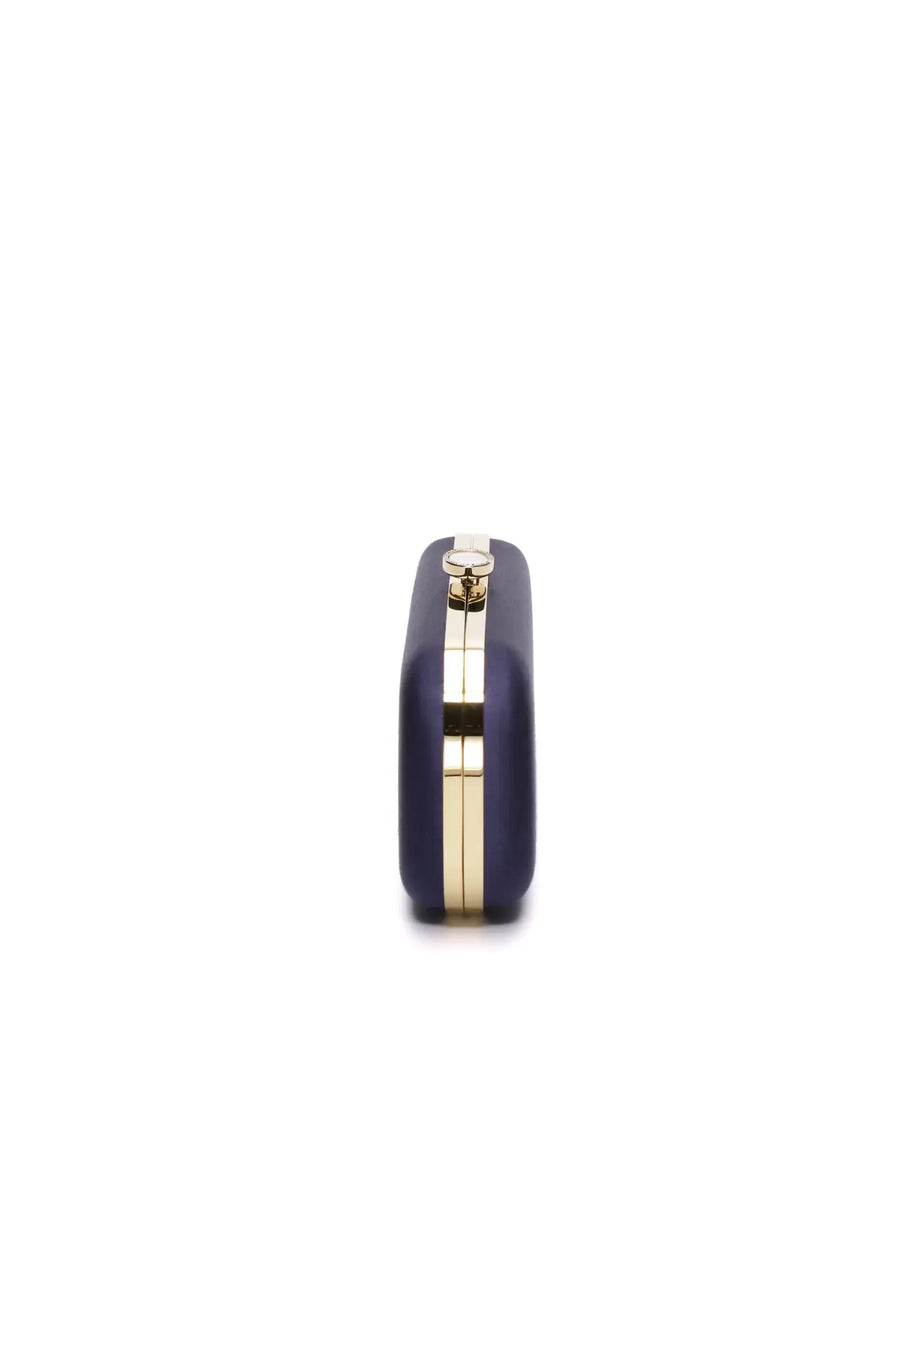 Navy Blue Satin Bella Clutch from The Bella Rosa Collection: Elegant navy blue cylindrical clutch with gold-tone hardware against a white background, perfect for an evening wedding.